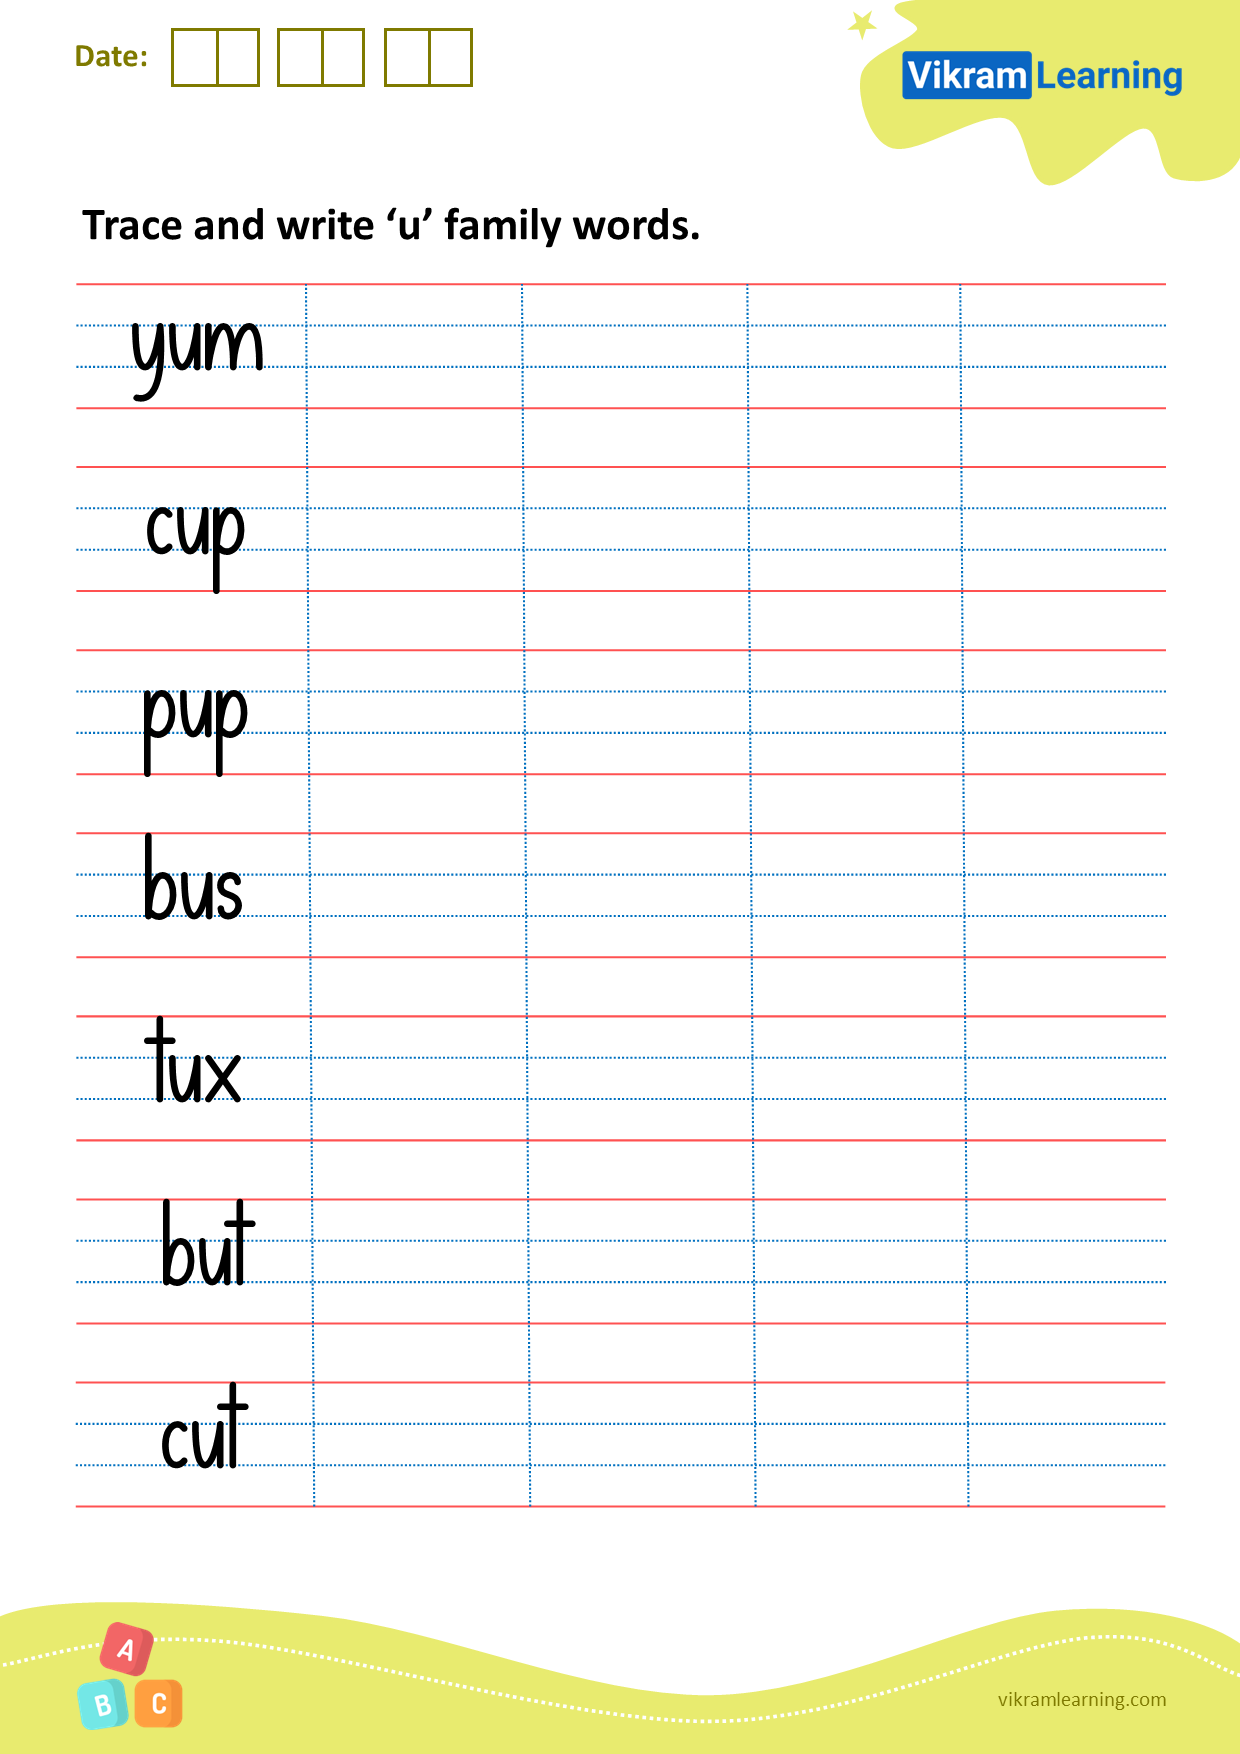 Download trace and write ‘u’ family words worksheets